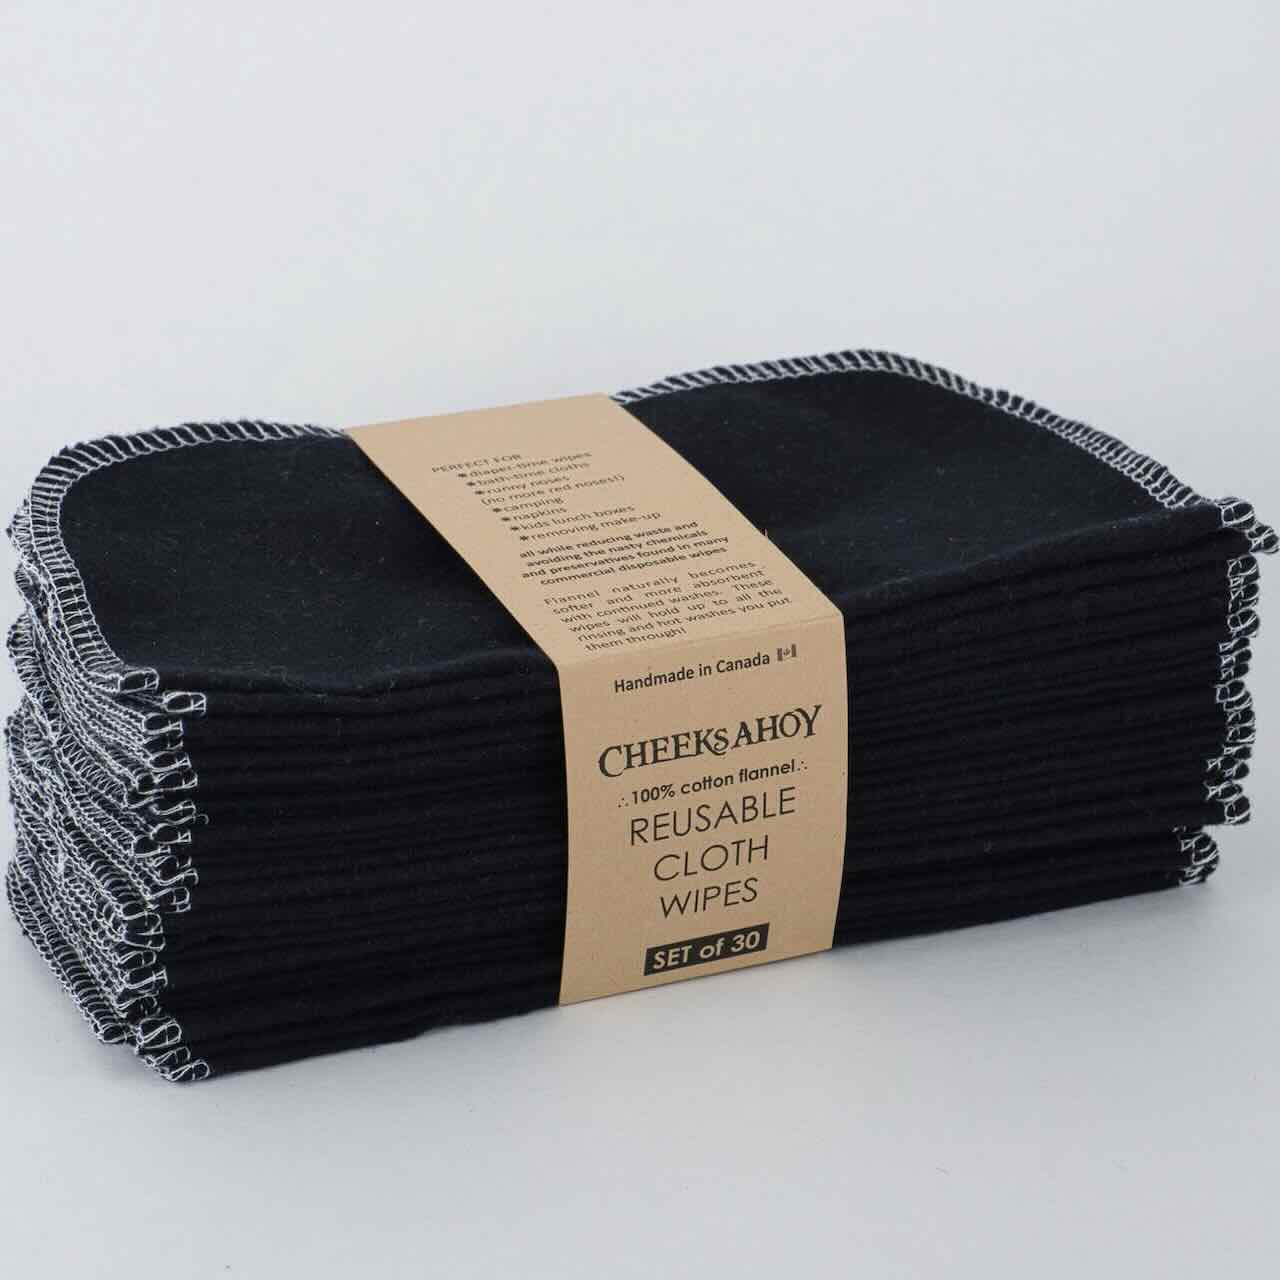 Dark coloured cheeks ahoy cloth wipes, set of 30 in its paper sleeve packaging, in a white background drop.